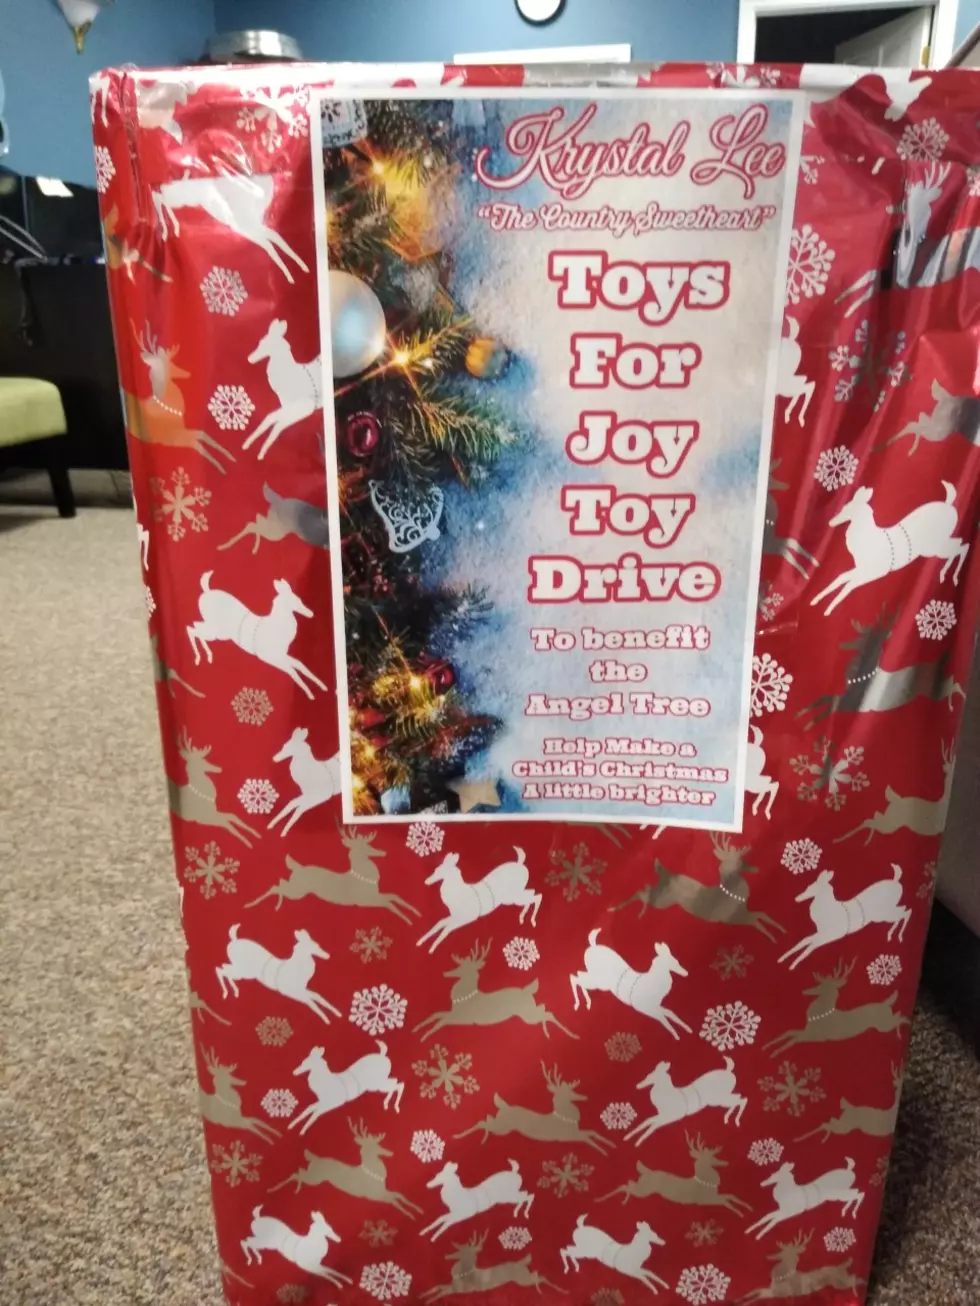 Townsquare Oneonta Collection Site For ‘Toys For Joy’